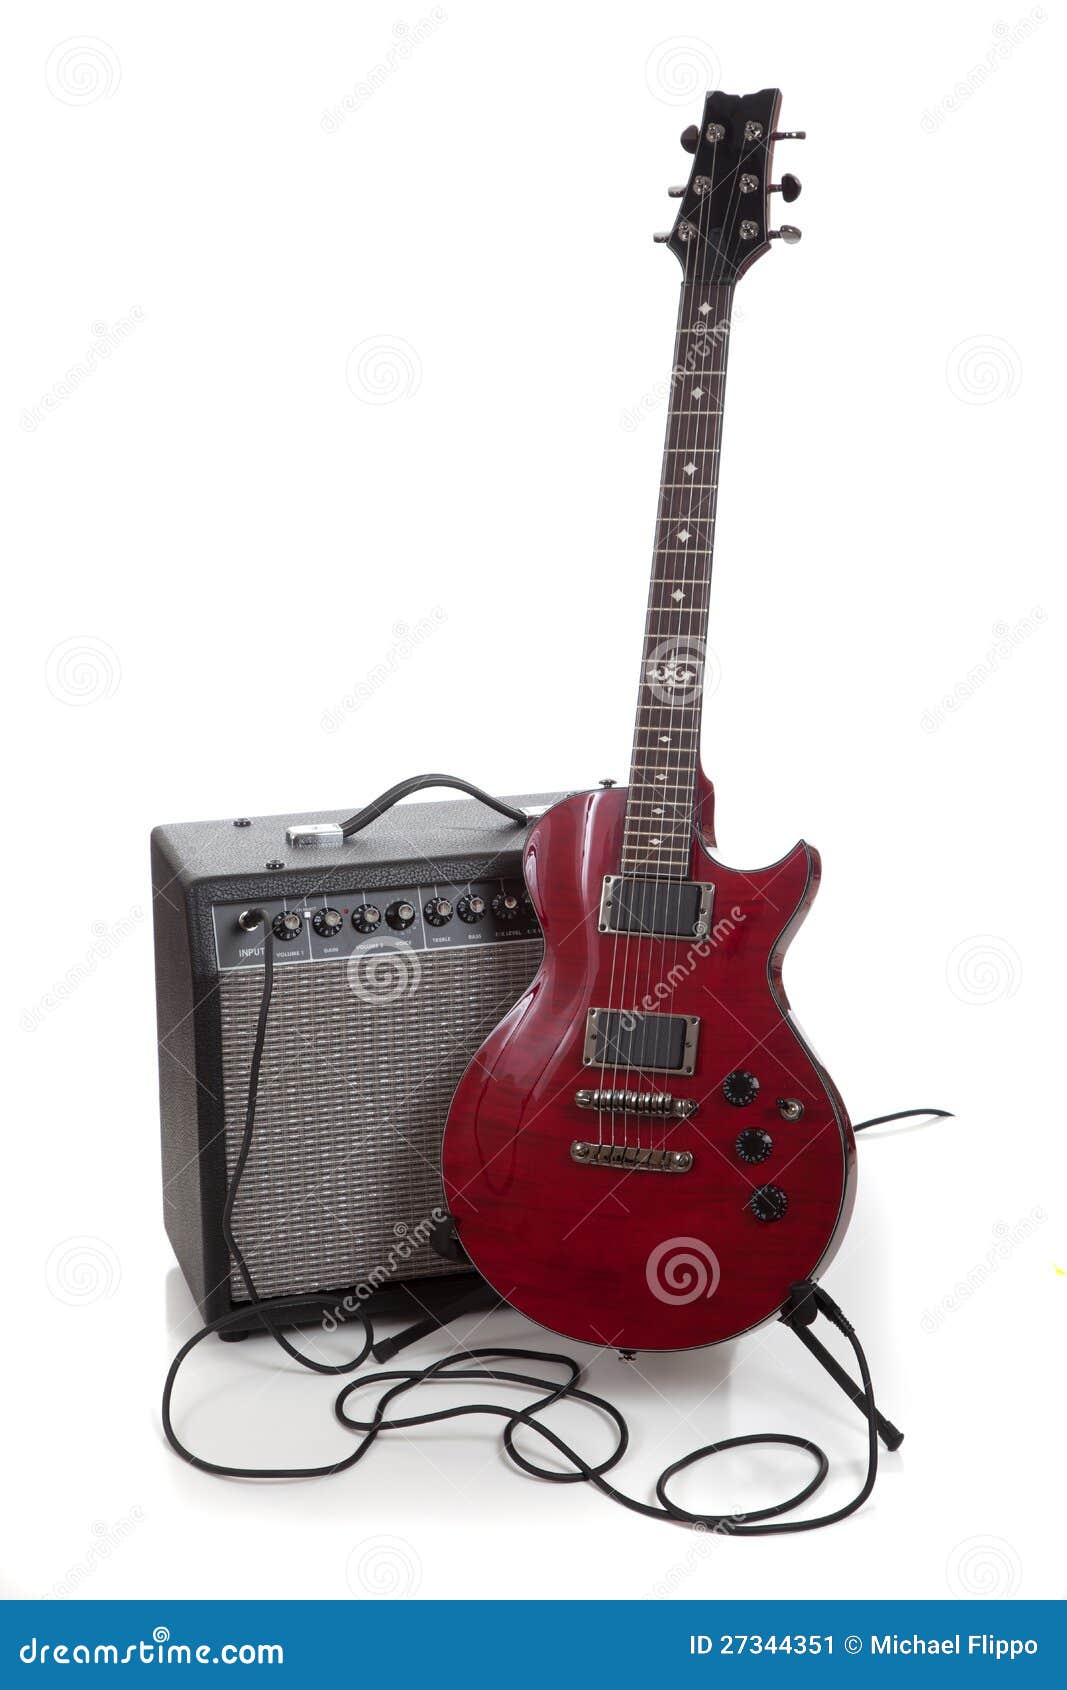 An Electric Guitar And Amp On A White Background With Copy ...